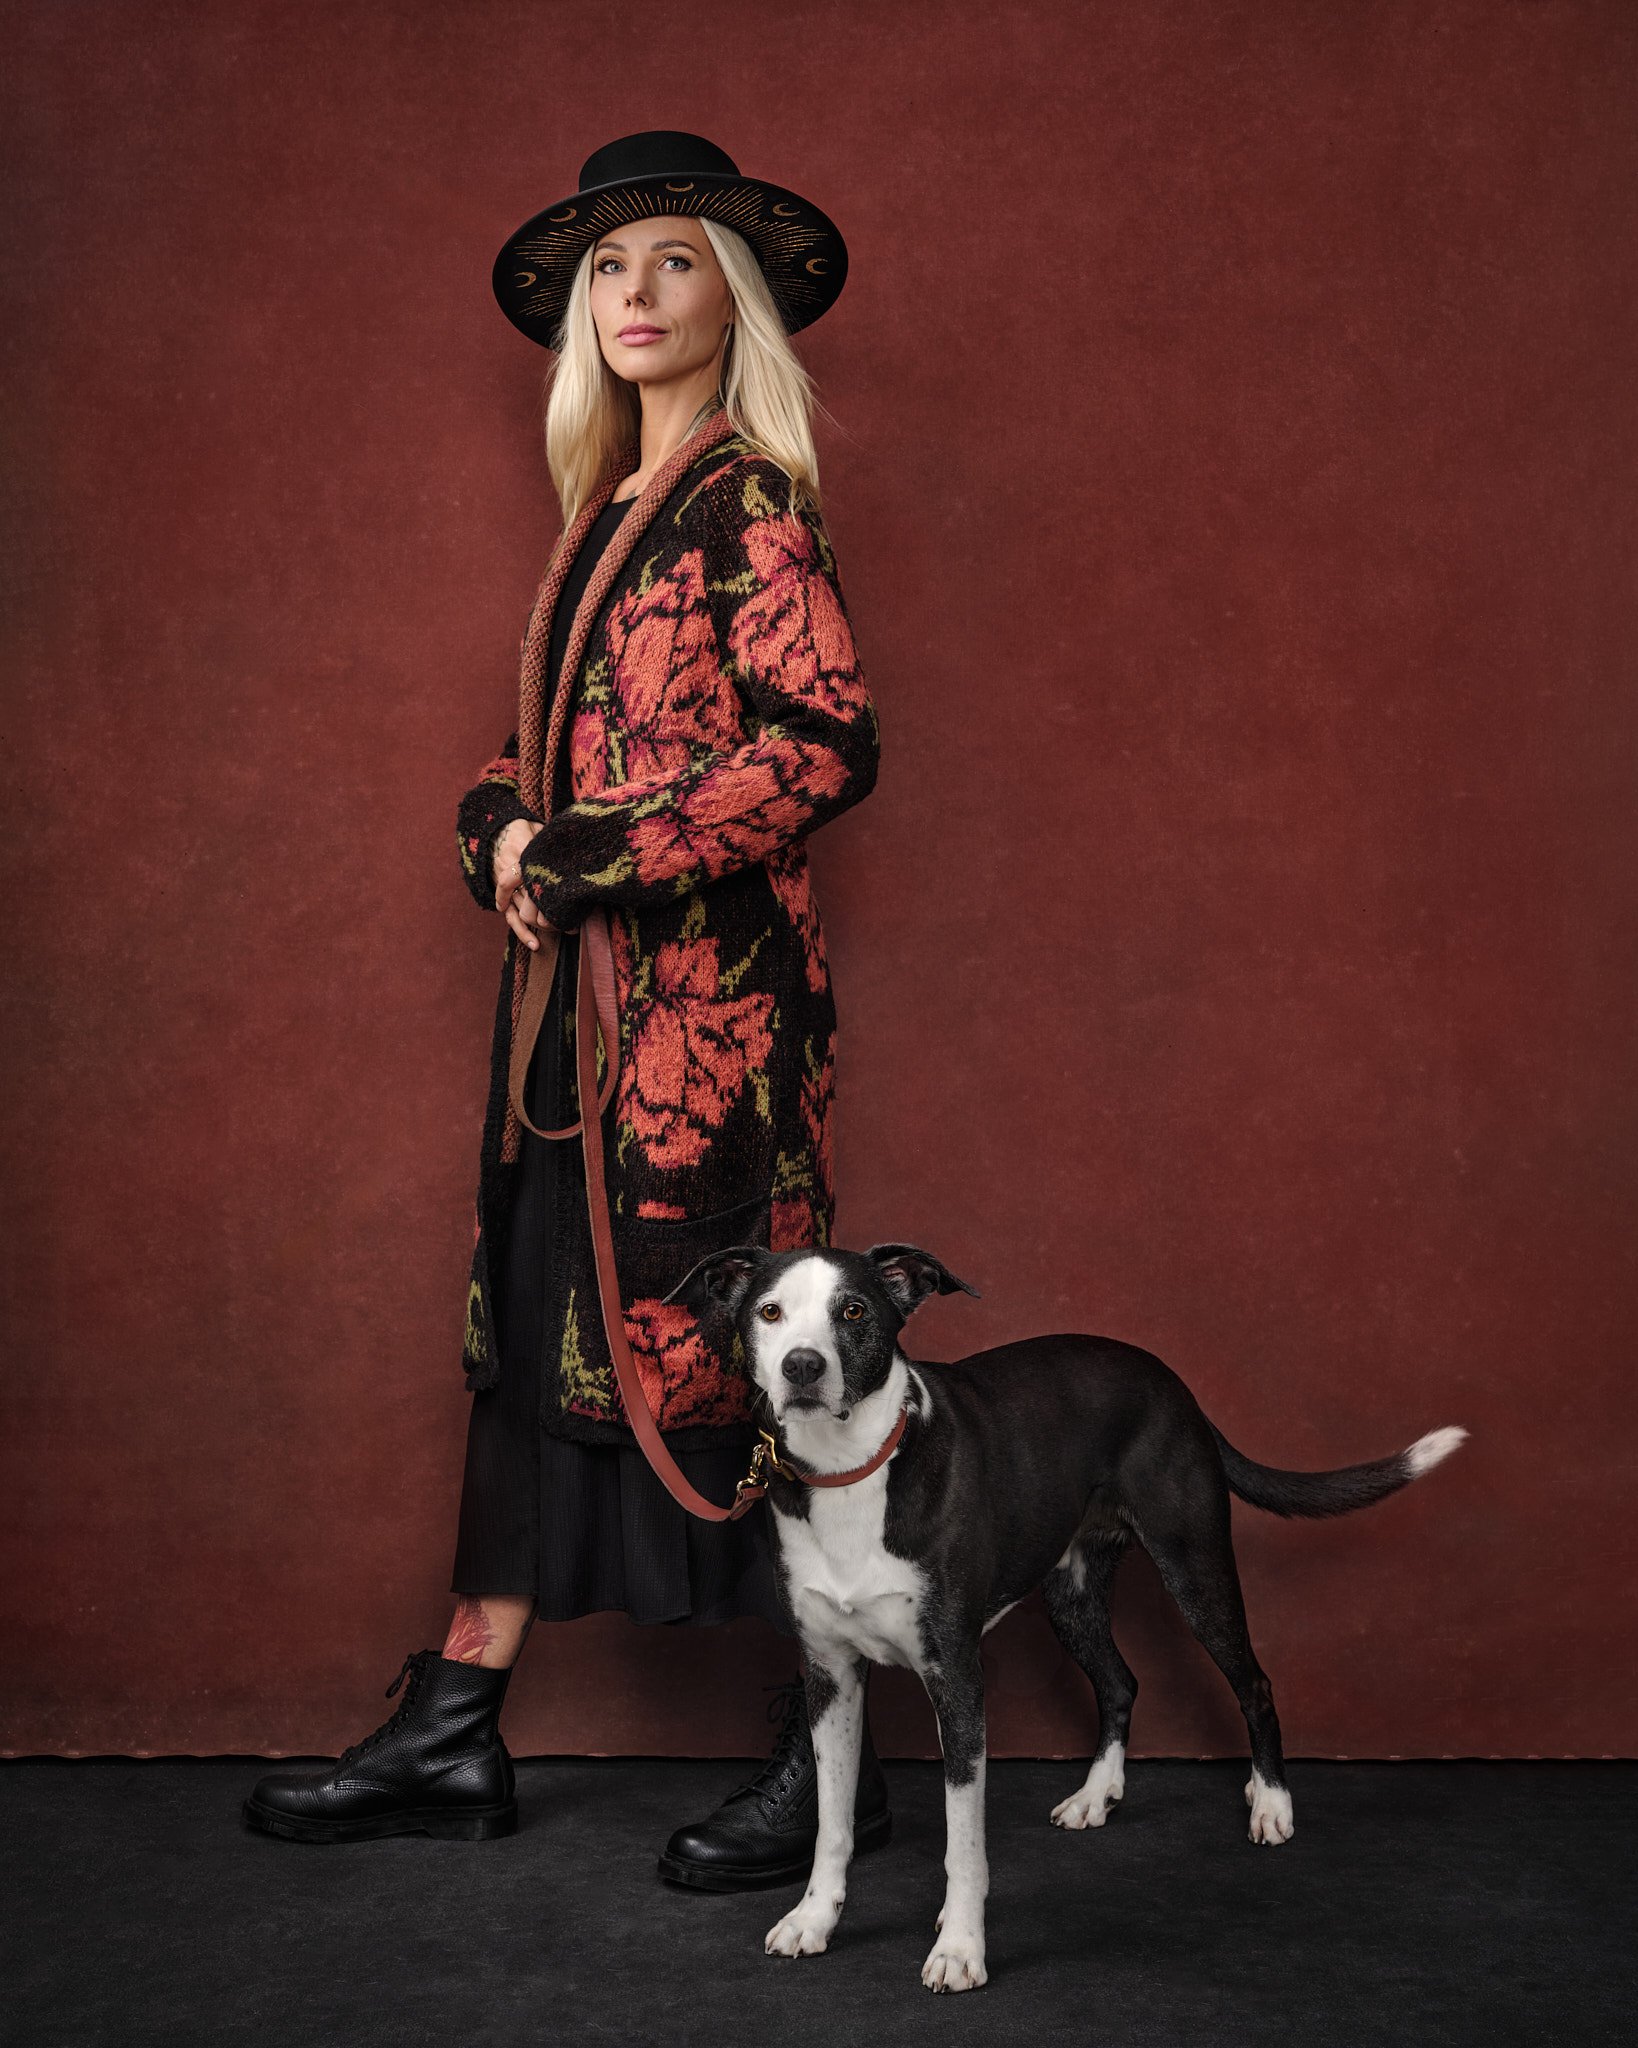 blonde-woman-with-black-and-white-dog-portrait-red-background-standing-with-leash.jpg